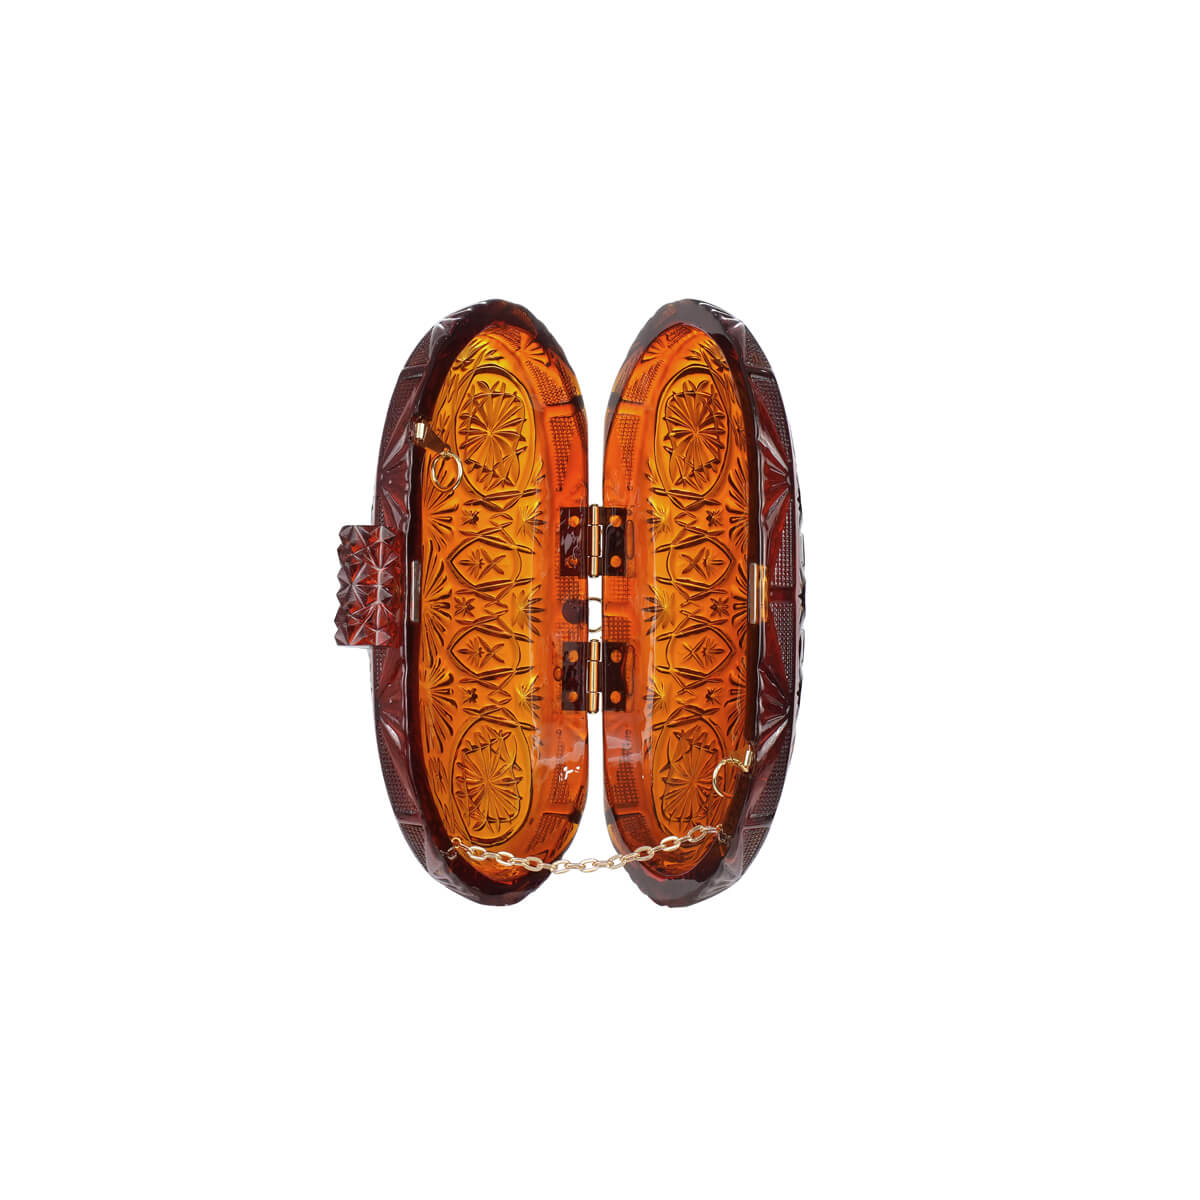 NEW IN Intricate Oval Clutch Amber